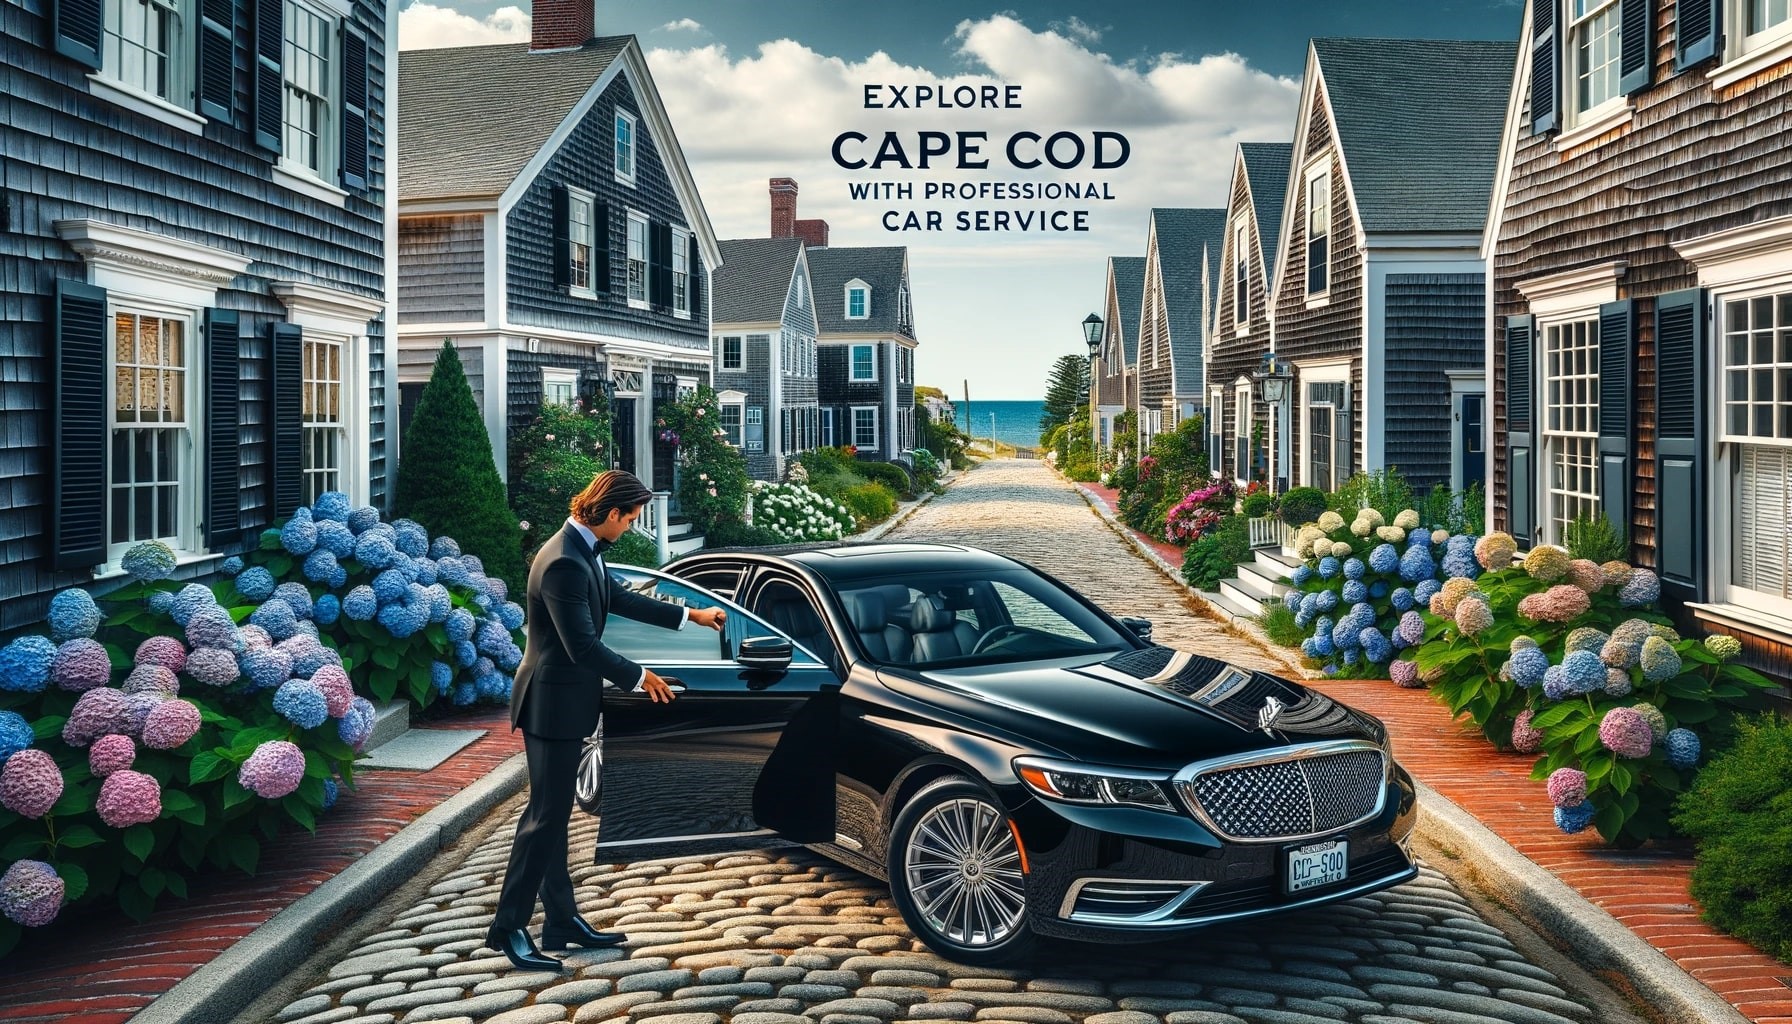 Cape Cod with Professional Car Service